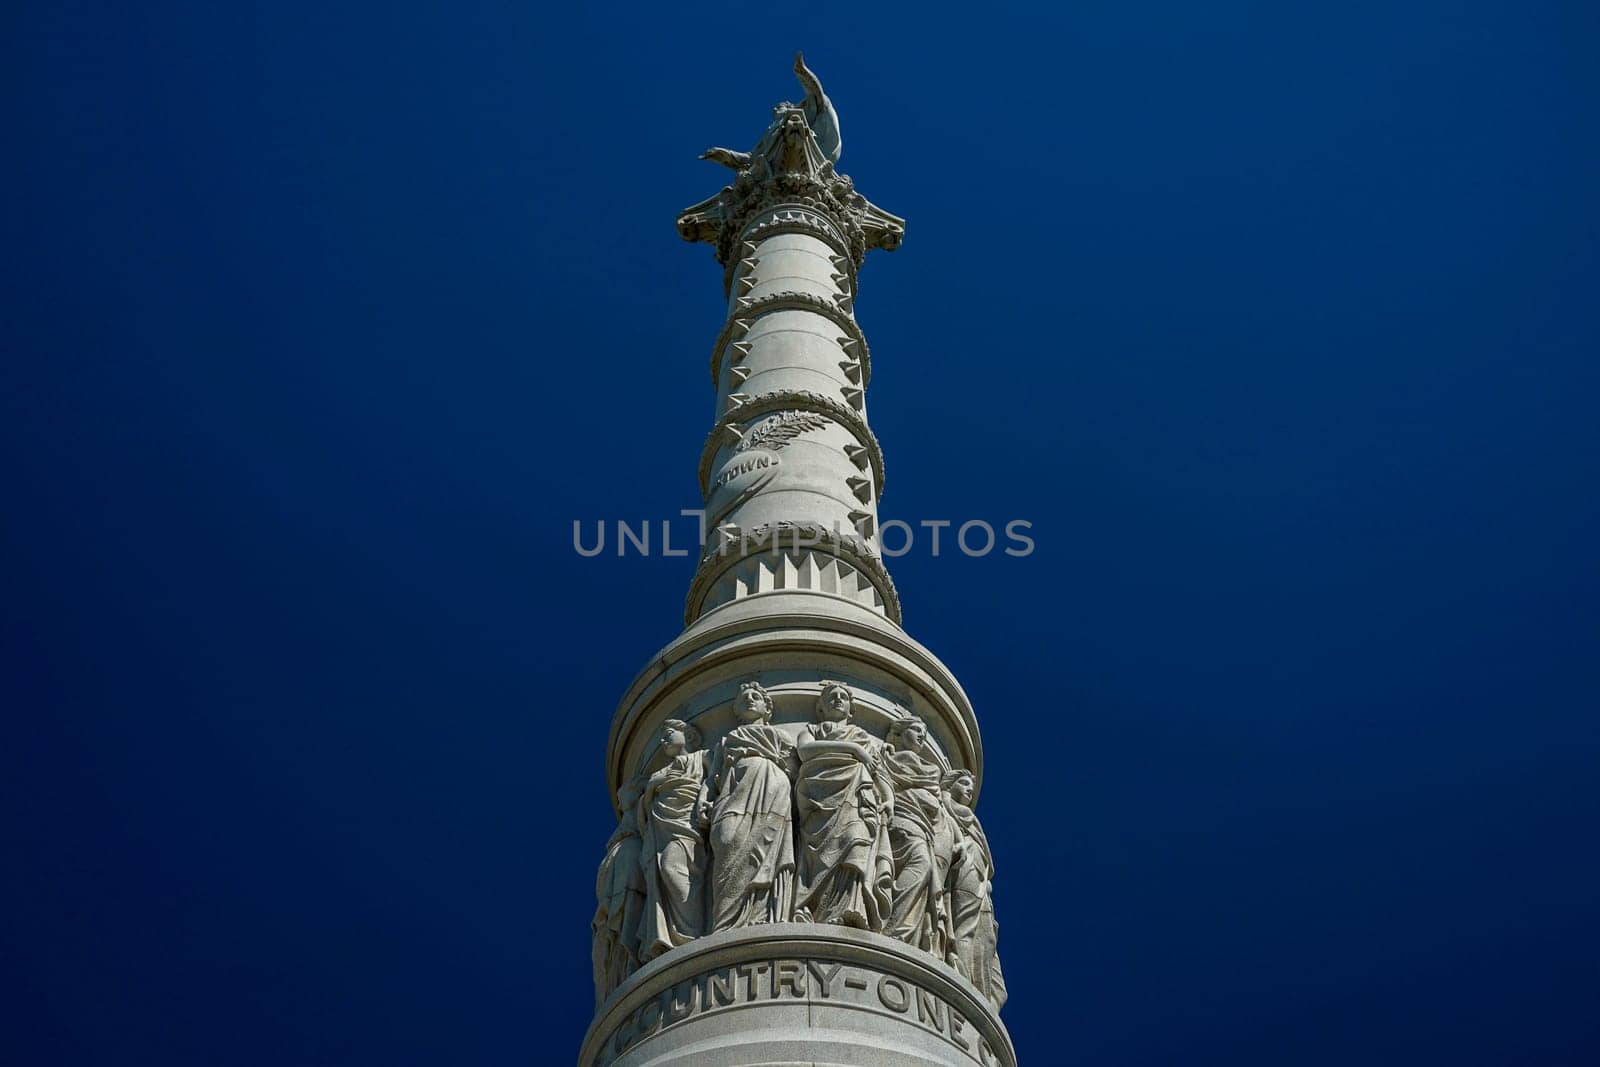 Yorktown Victory monument at Battlefield in the State of Virginia USA